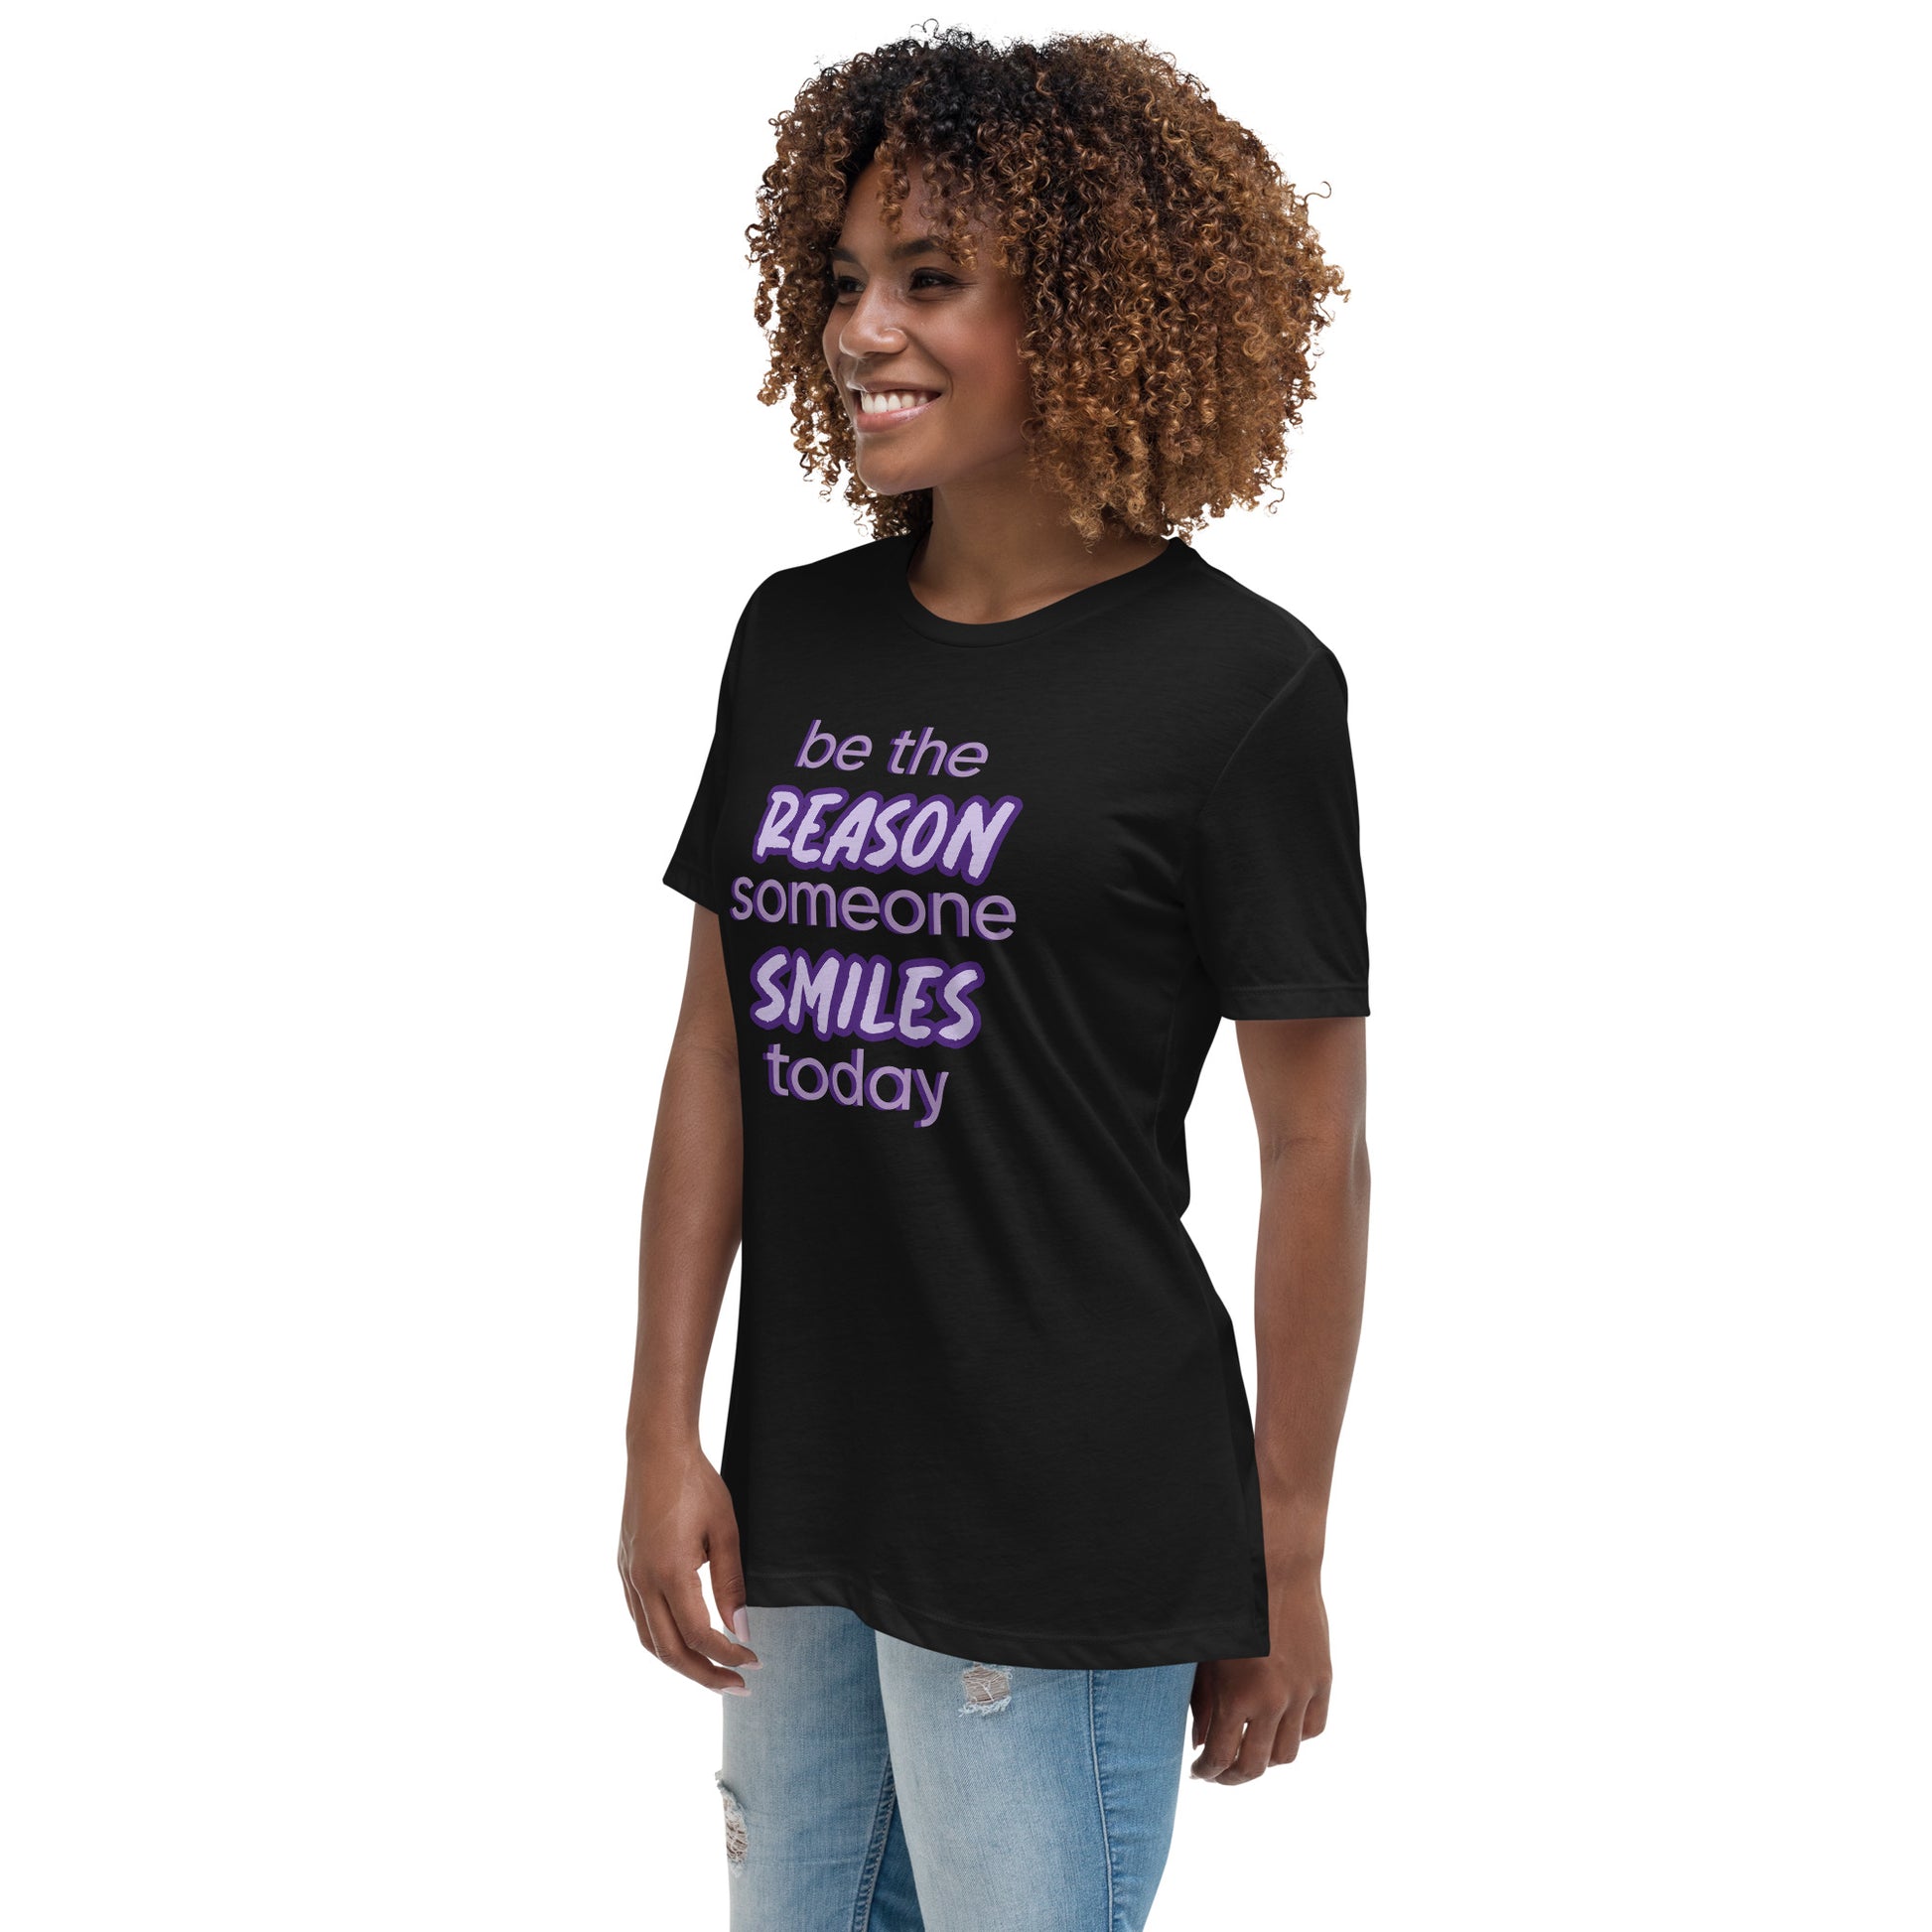 Woman with black T-shirt and the quote "be the reason someone smiles today" in purple on it. 